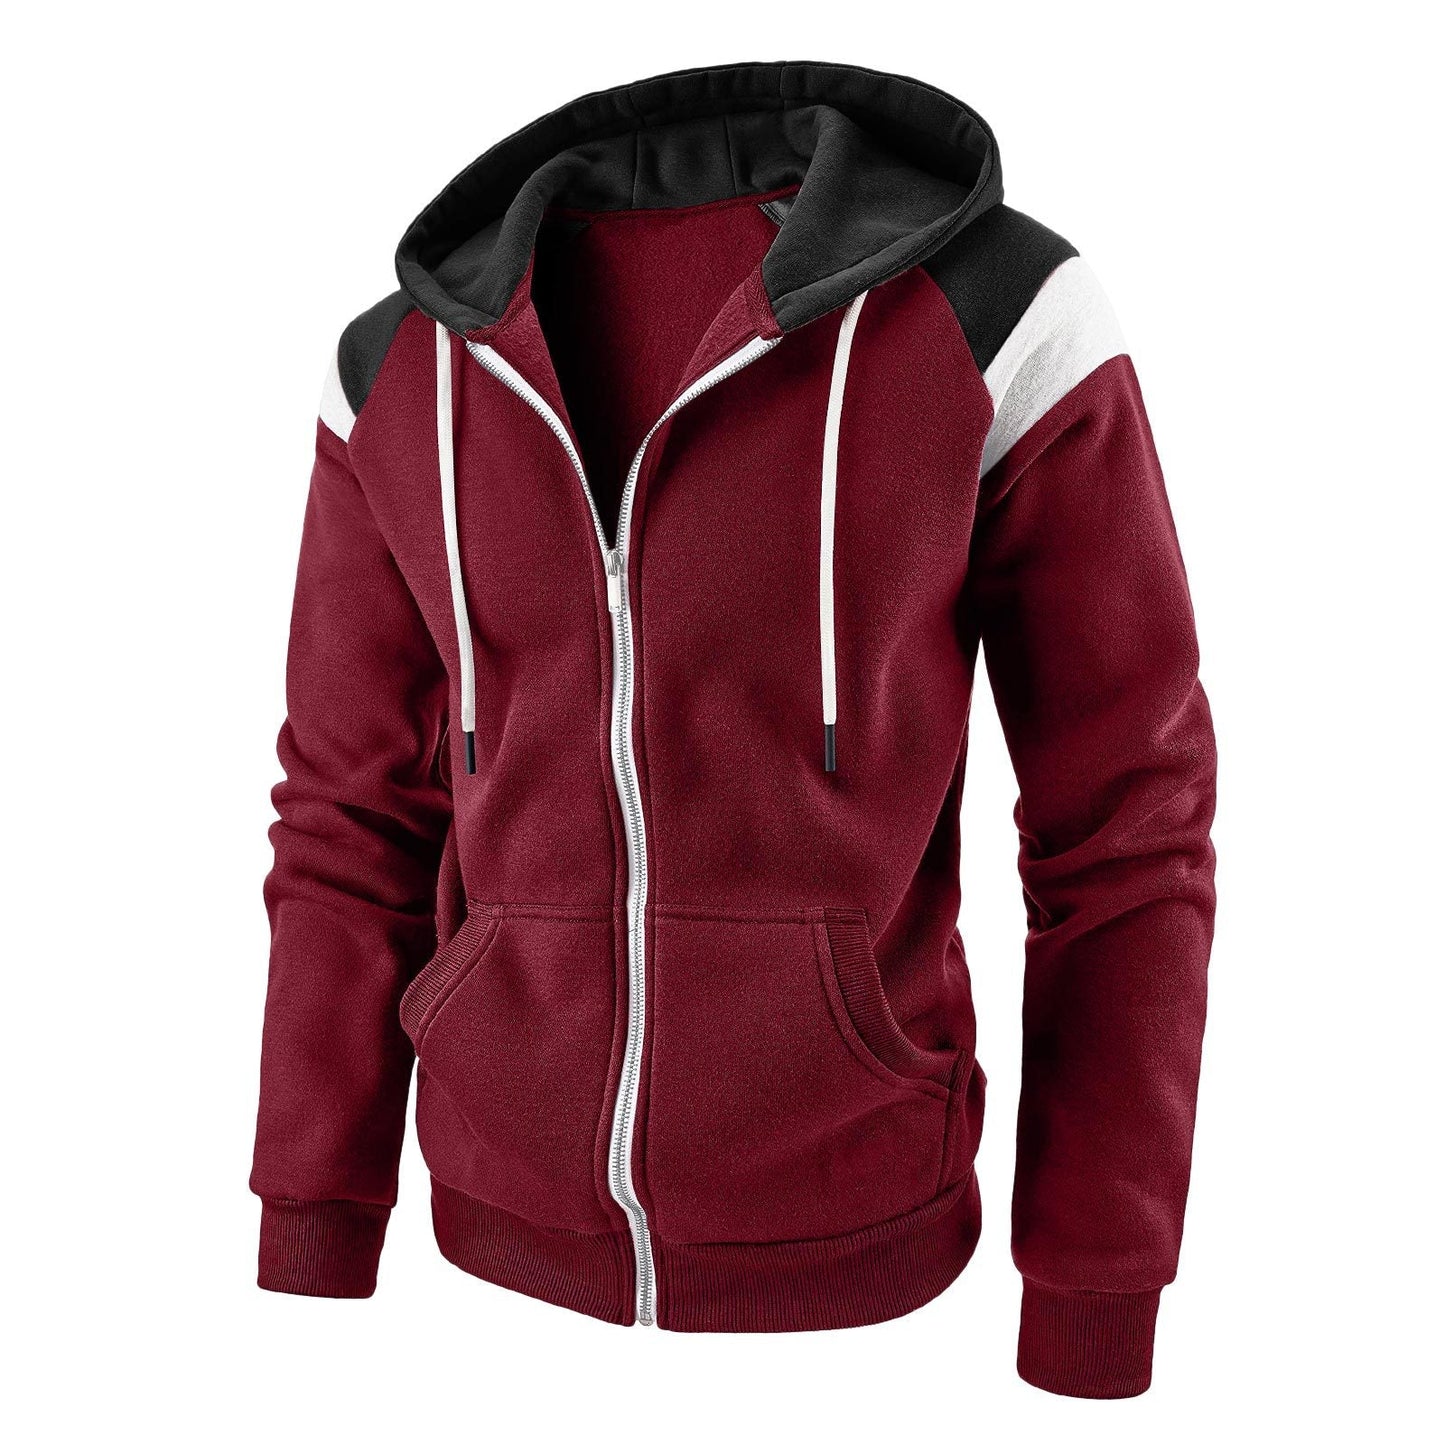 Casual Men's Zipper Hoodies-Coats & Jackets-Wine Red-M-Free Shipping Leatheretro